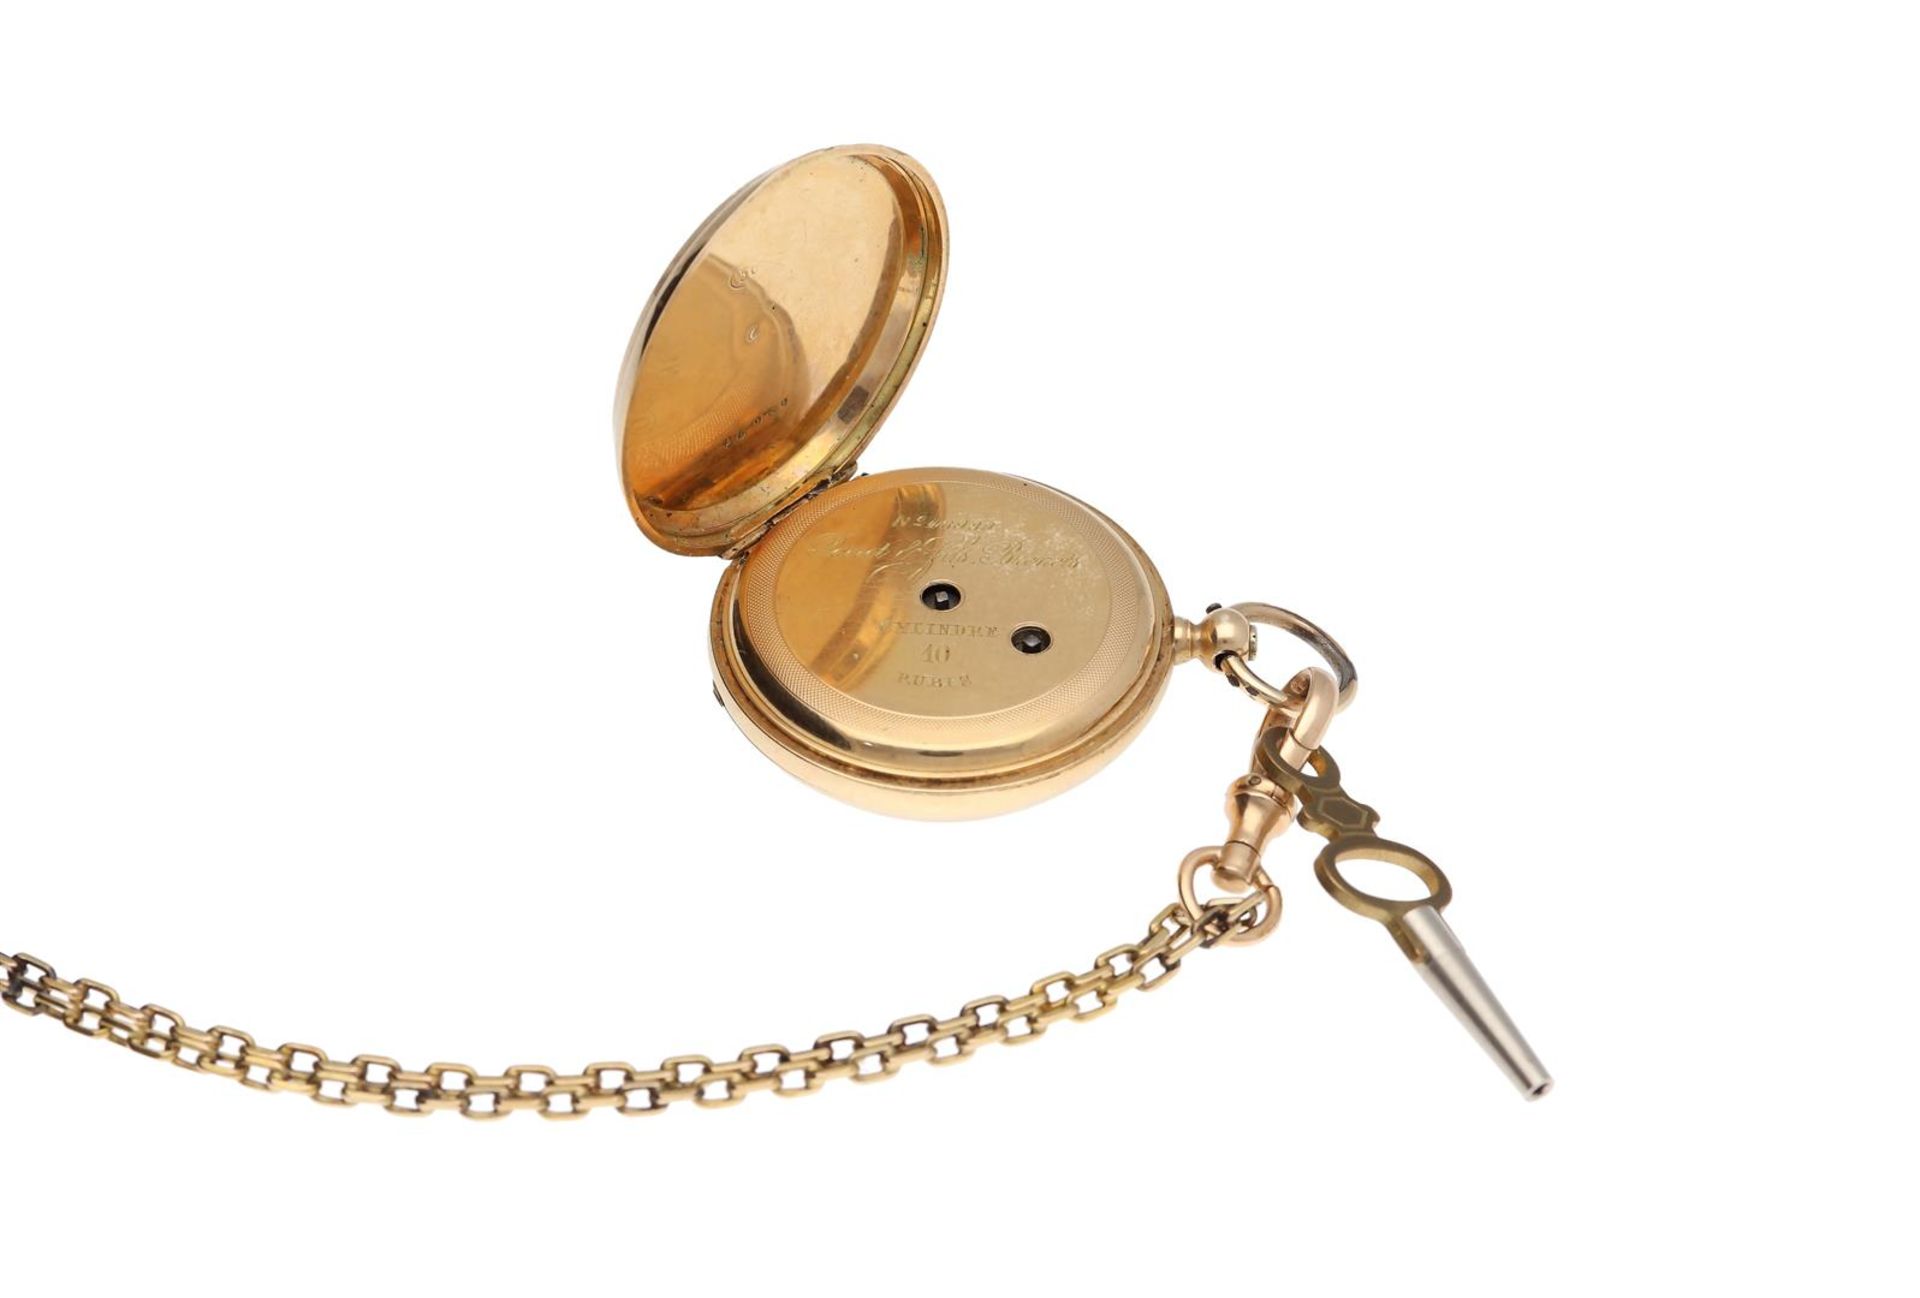 A 14-kt gold ladies remontoir pocket watch on a gold chain, Peret et fils, the engraved case with mo - Image 9 of 9